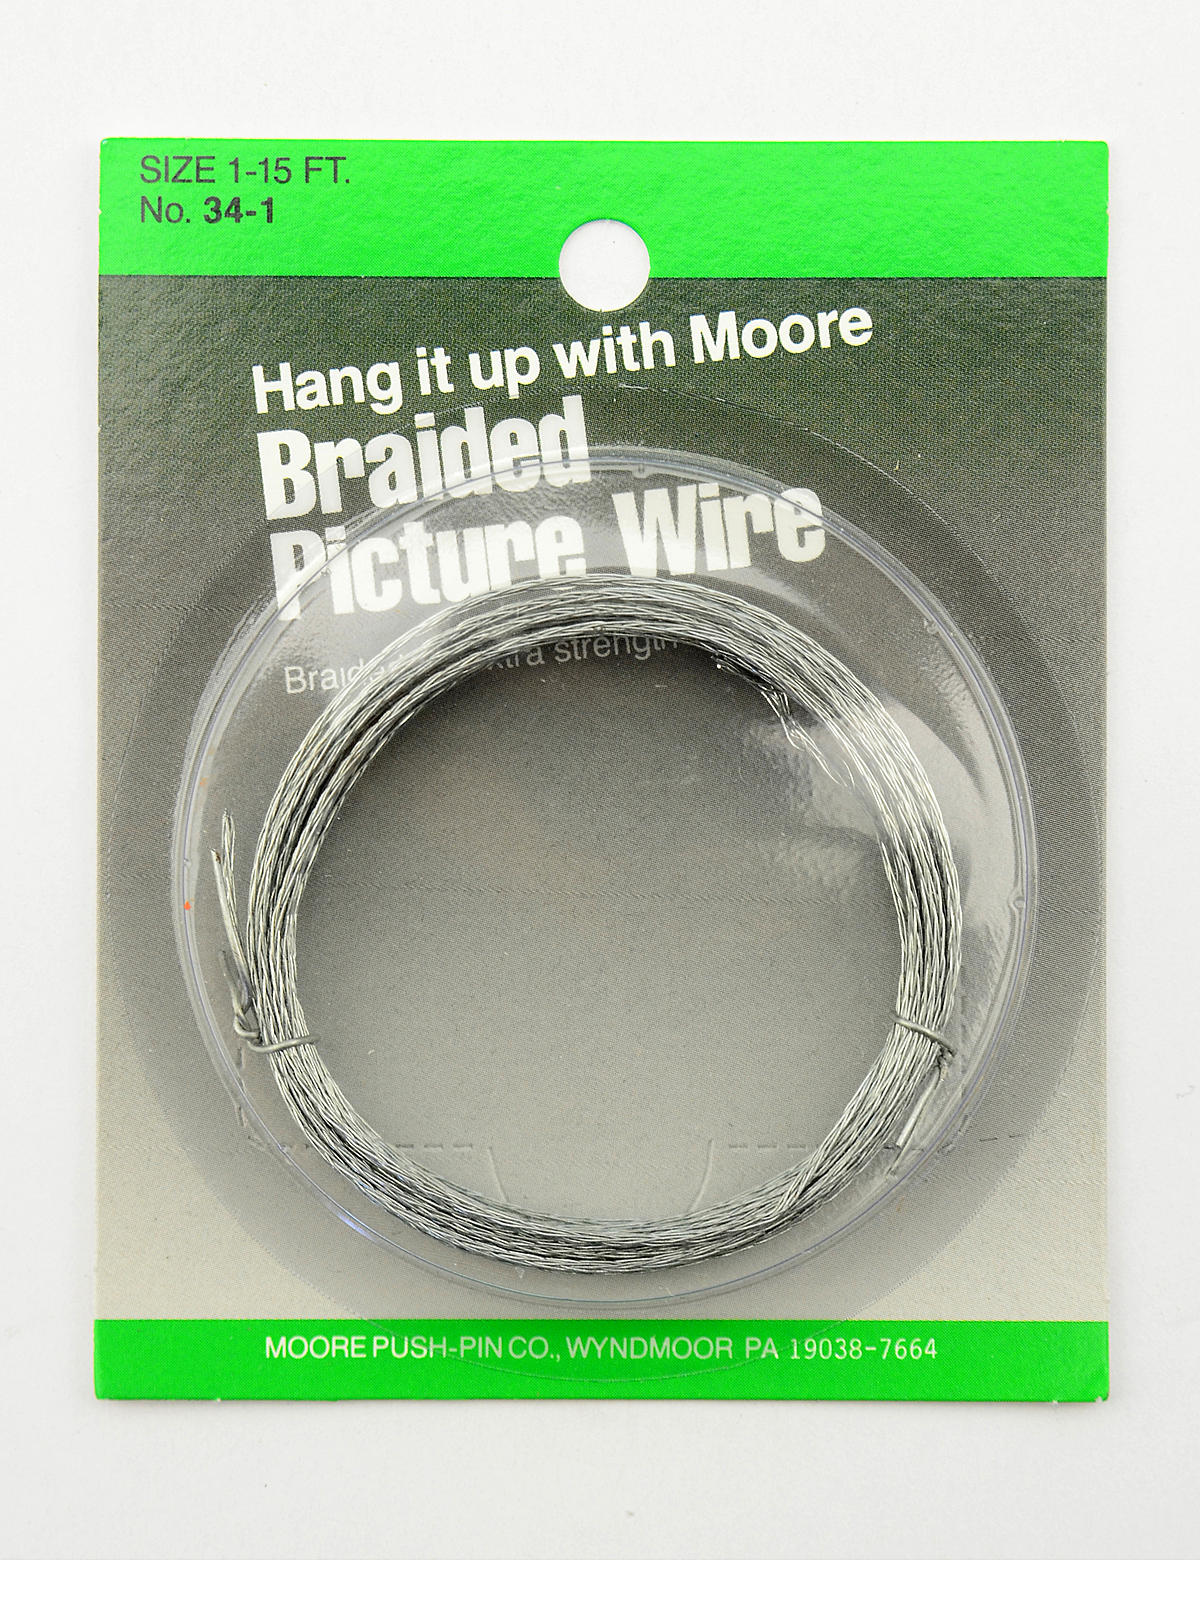 Braided Picture Wire 12 Lbs. 8 Strand 15 Ft. Roll